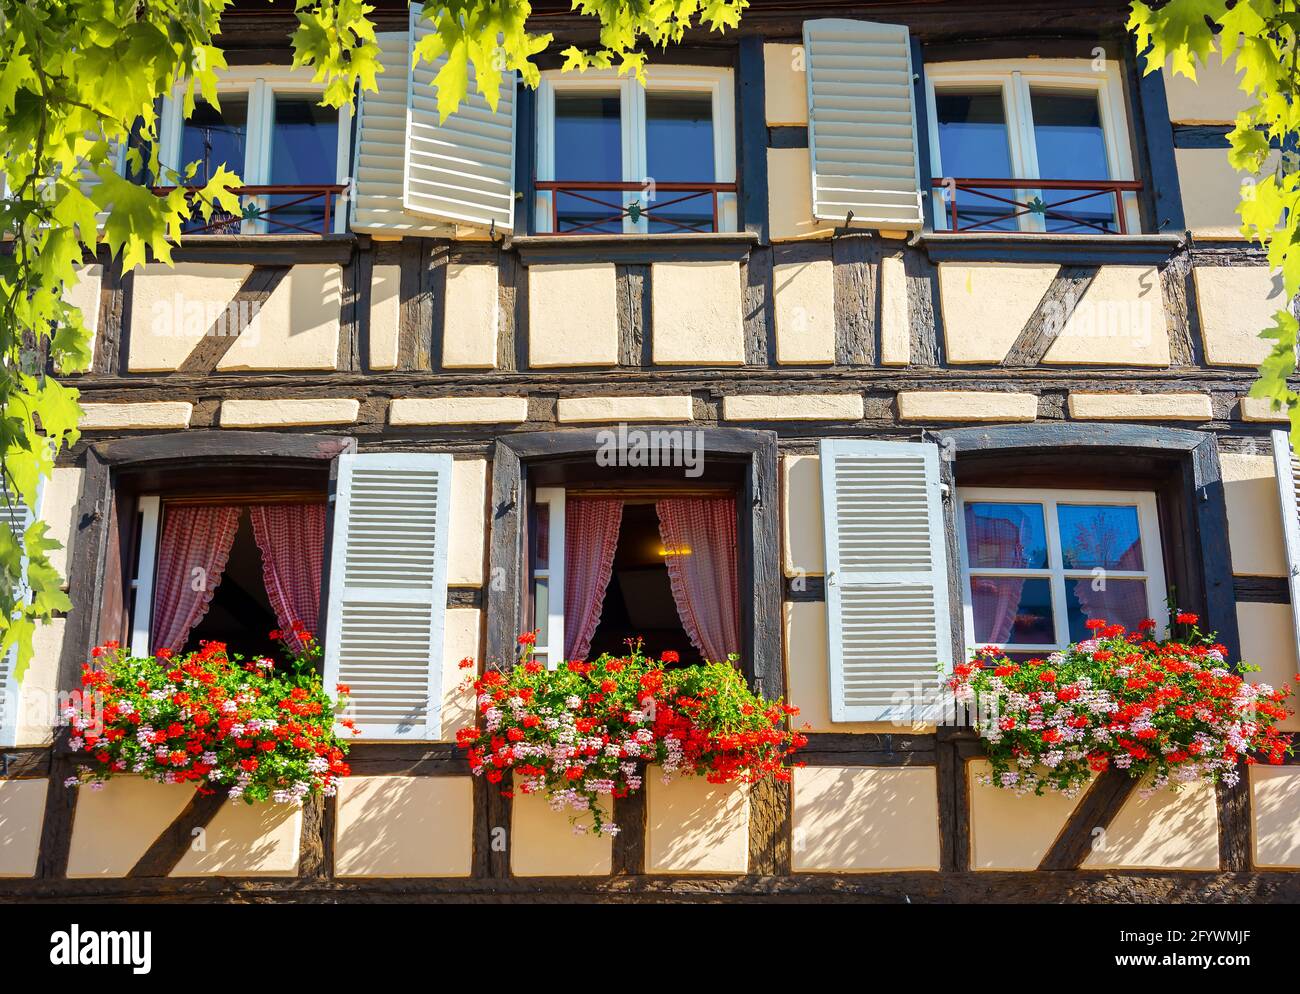 Wall and windows of traditional old house in Strasbourg, France Stock Photo